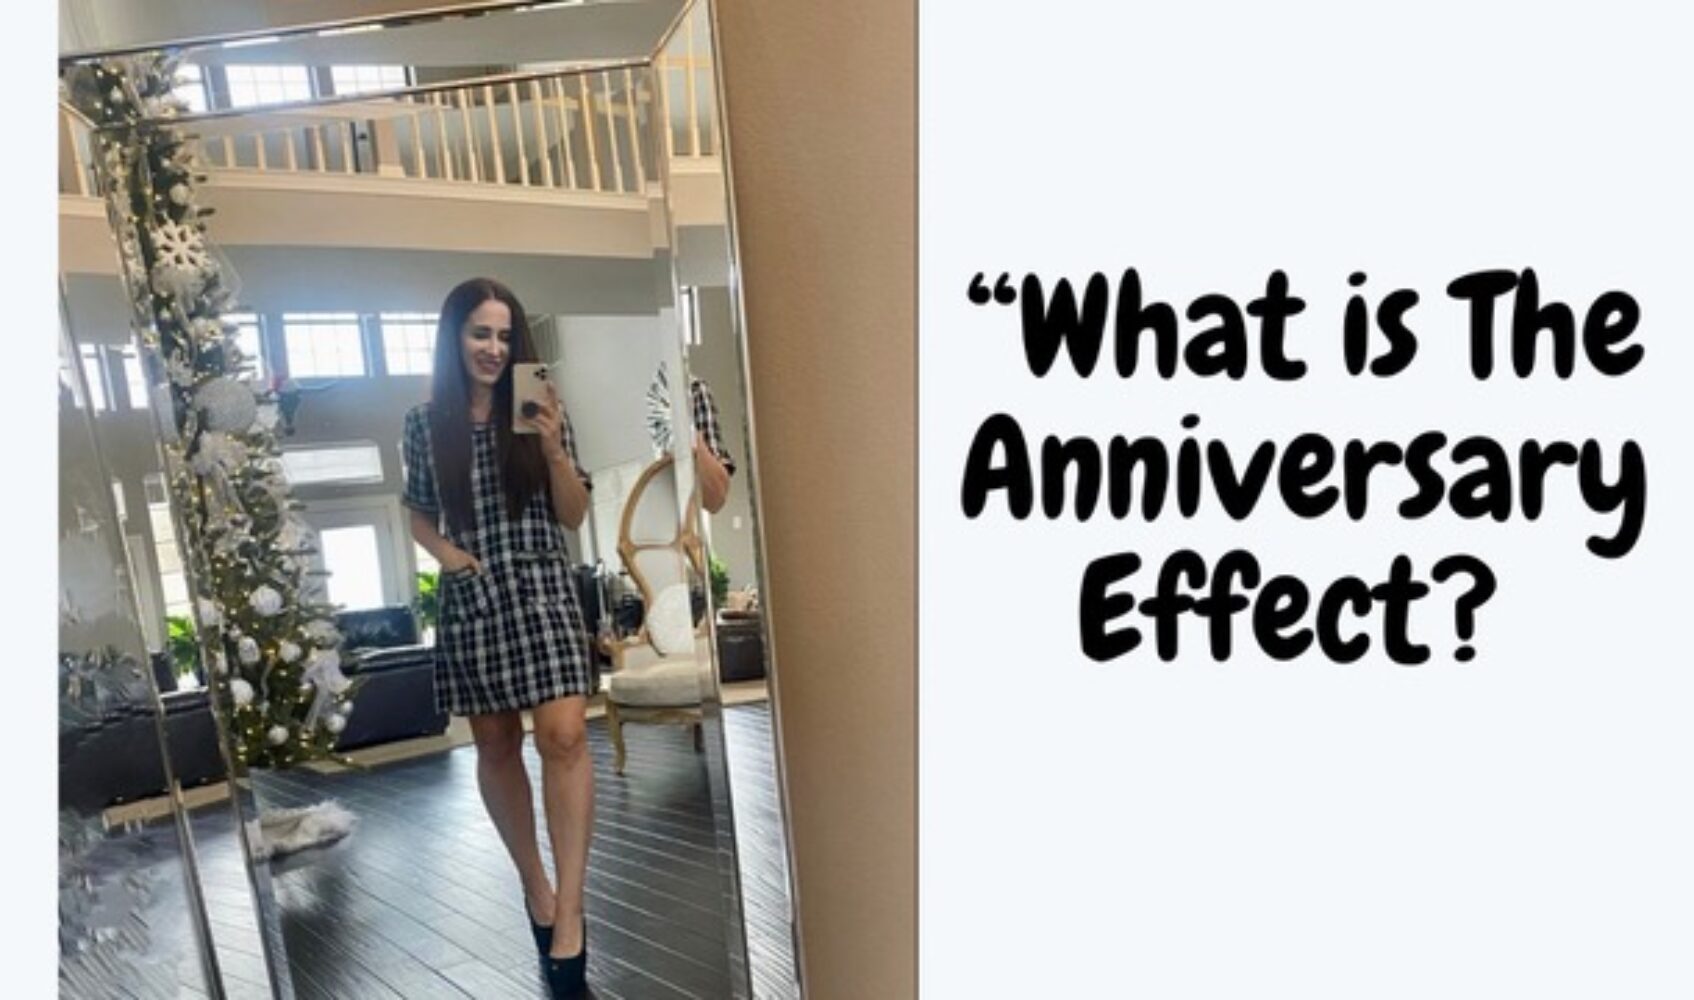 The Anniversary Effect